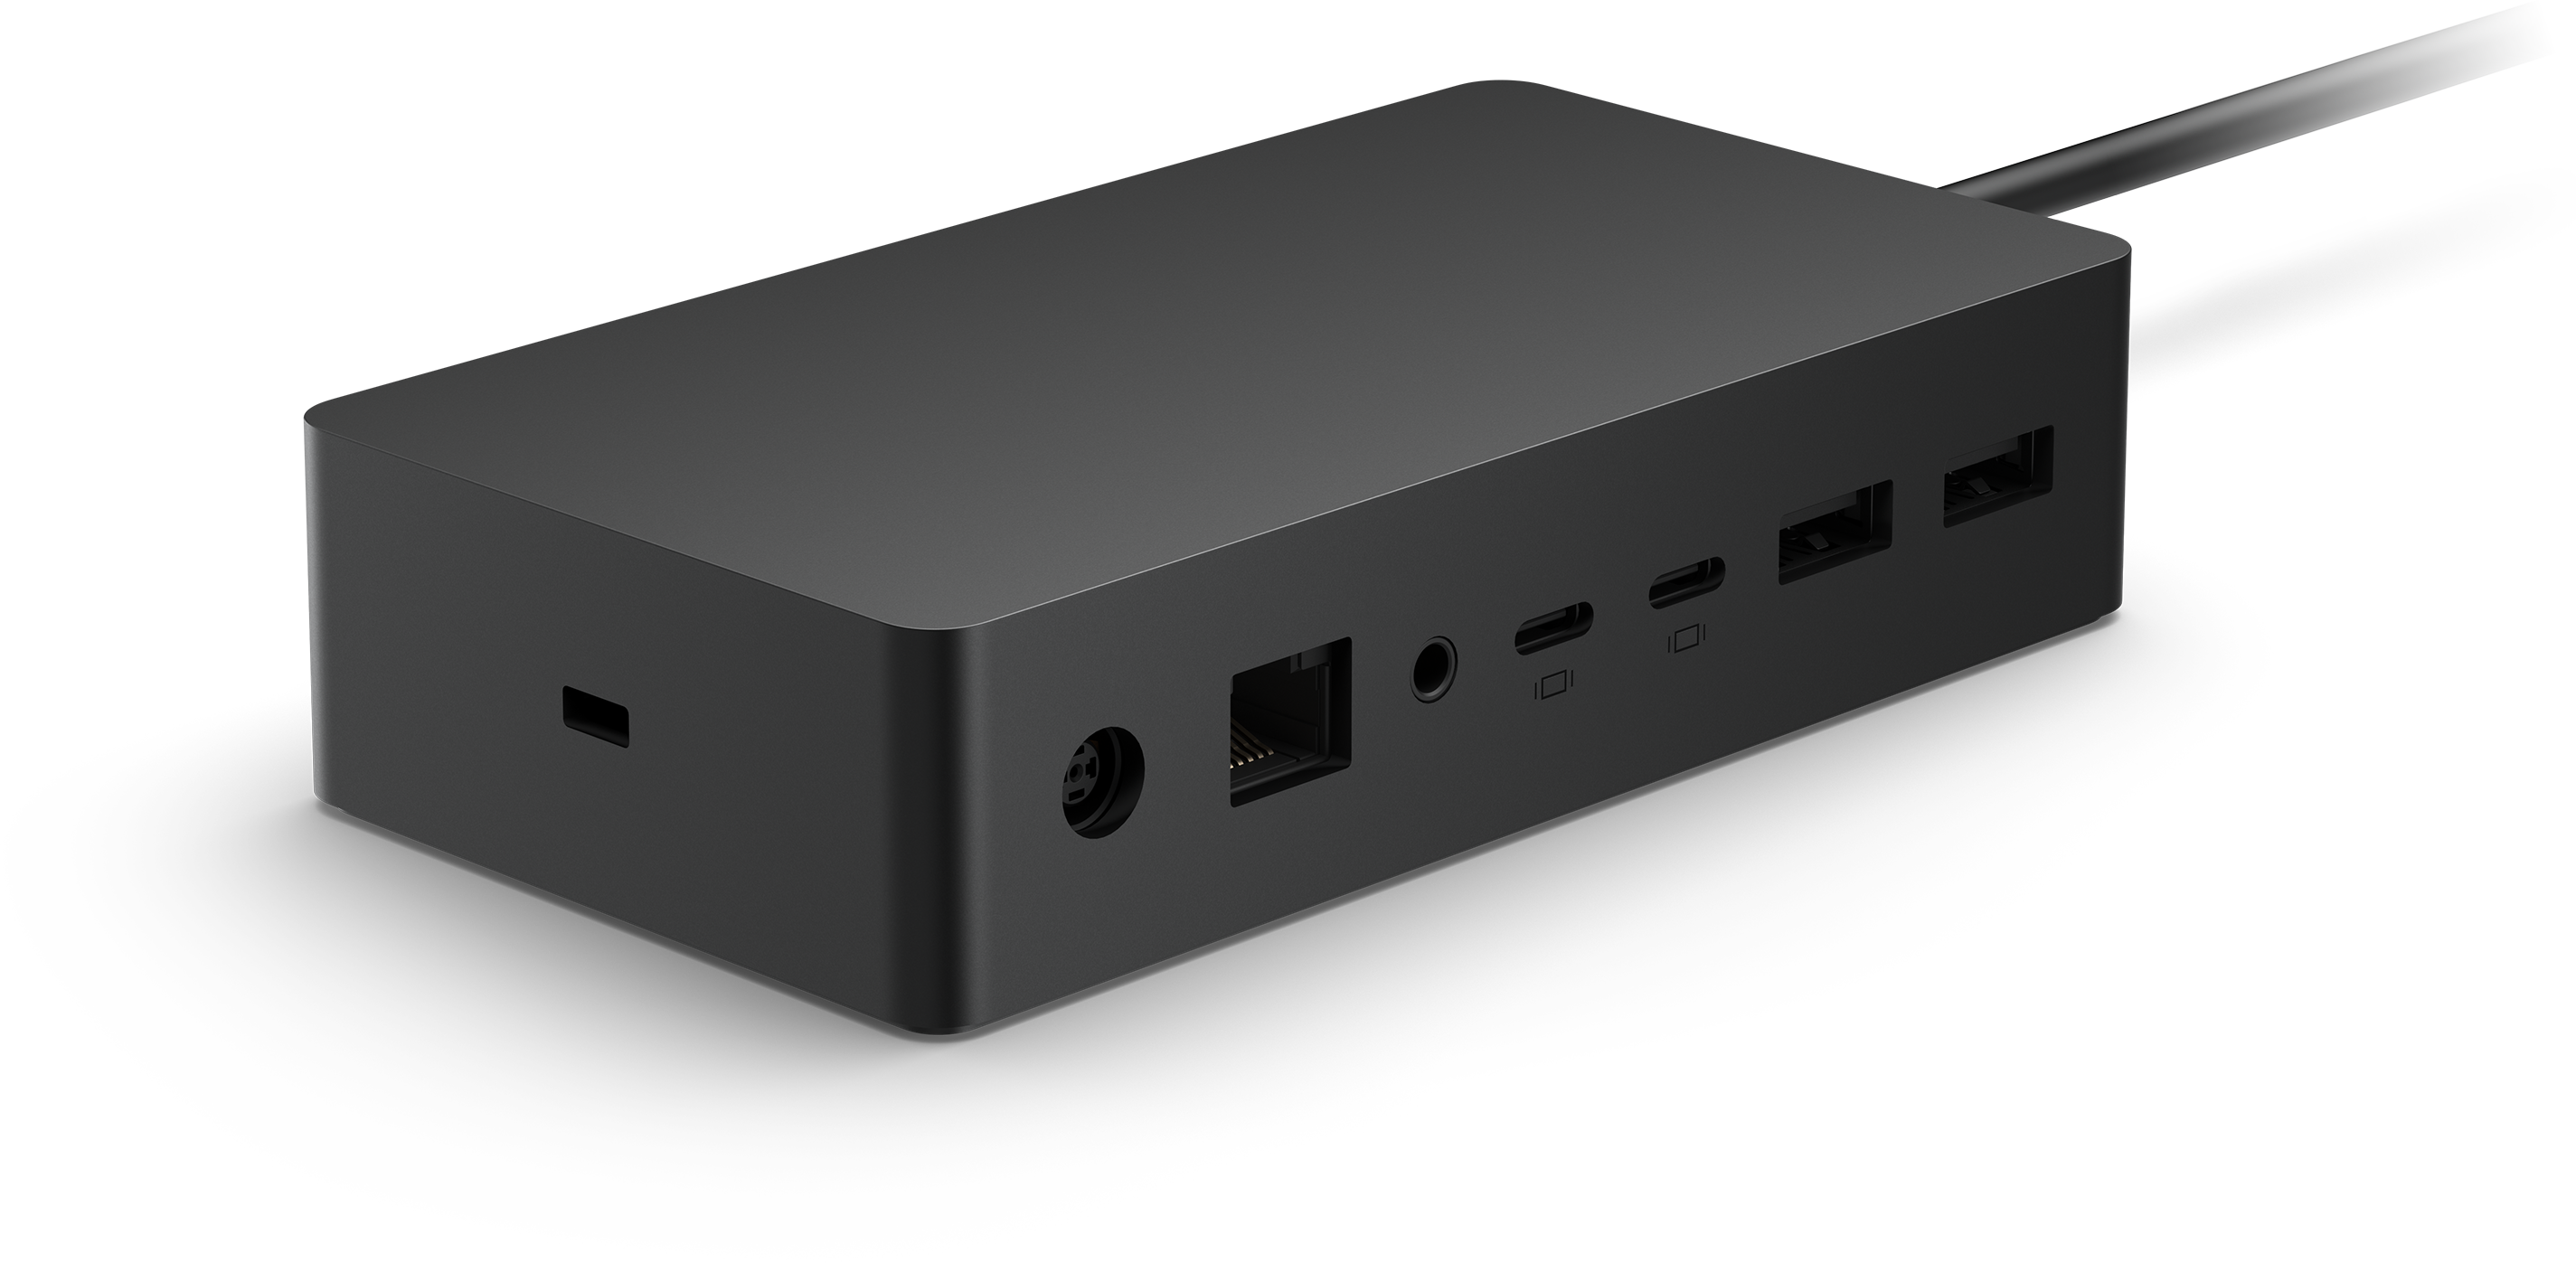 Surface Dock 2 for Business